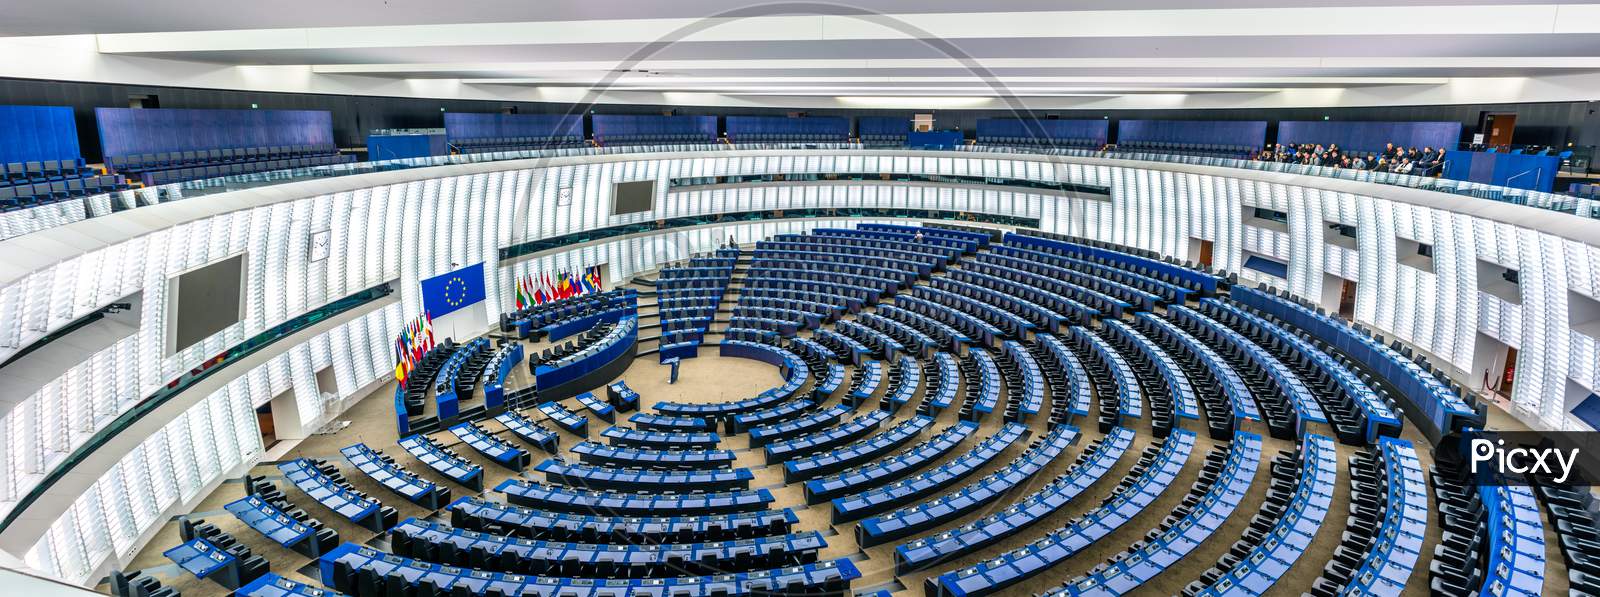 Plenary Hall Of The European Parliament In Strasbourg, France